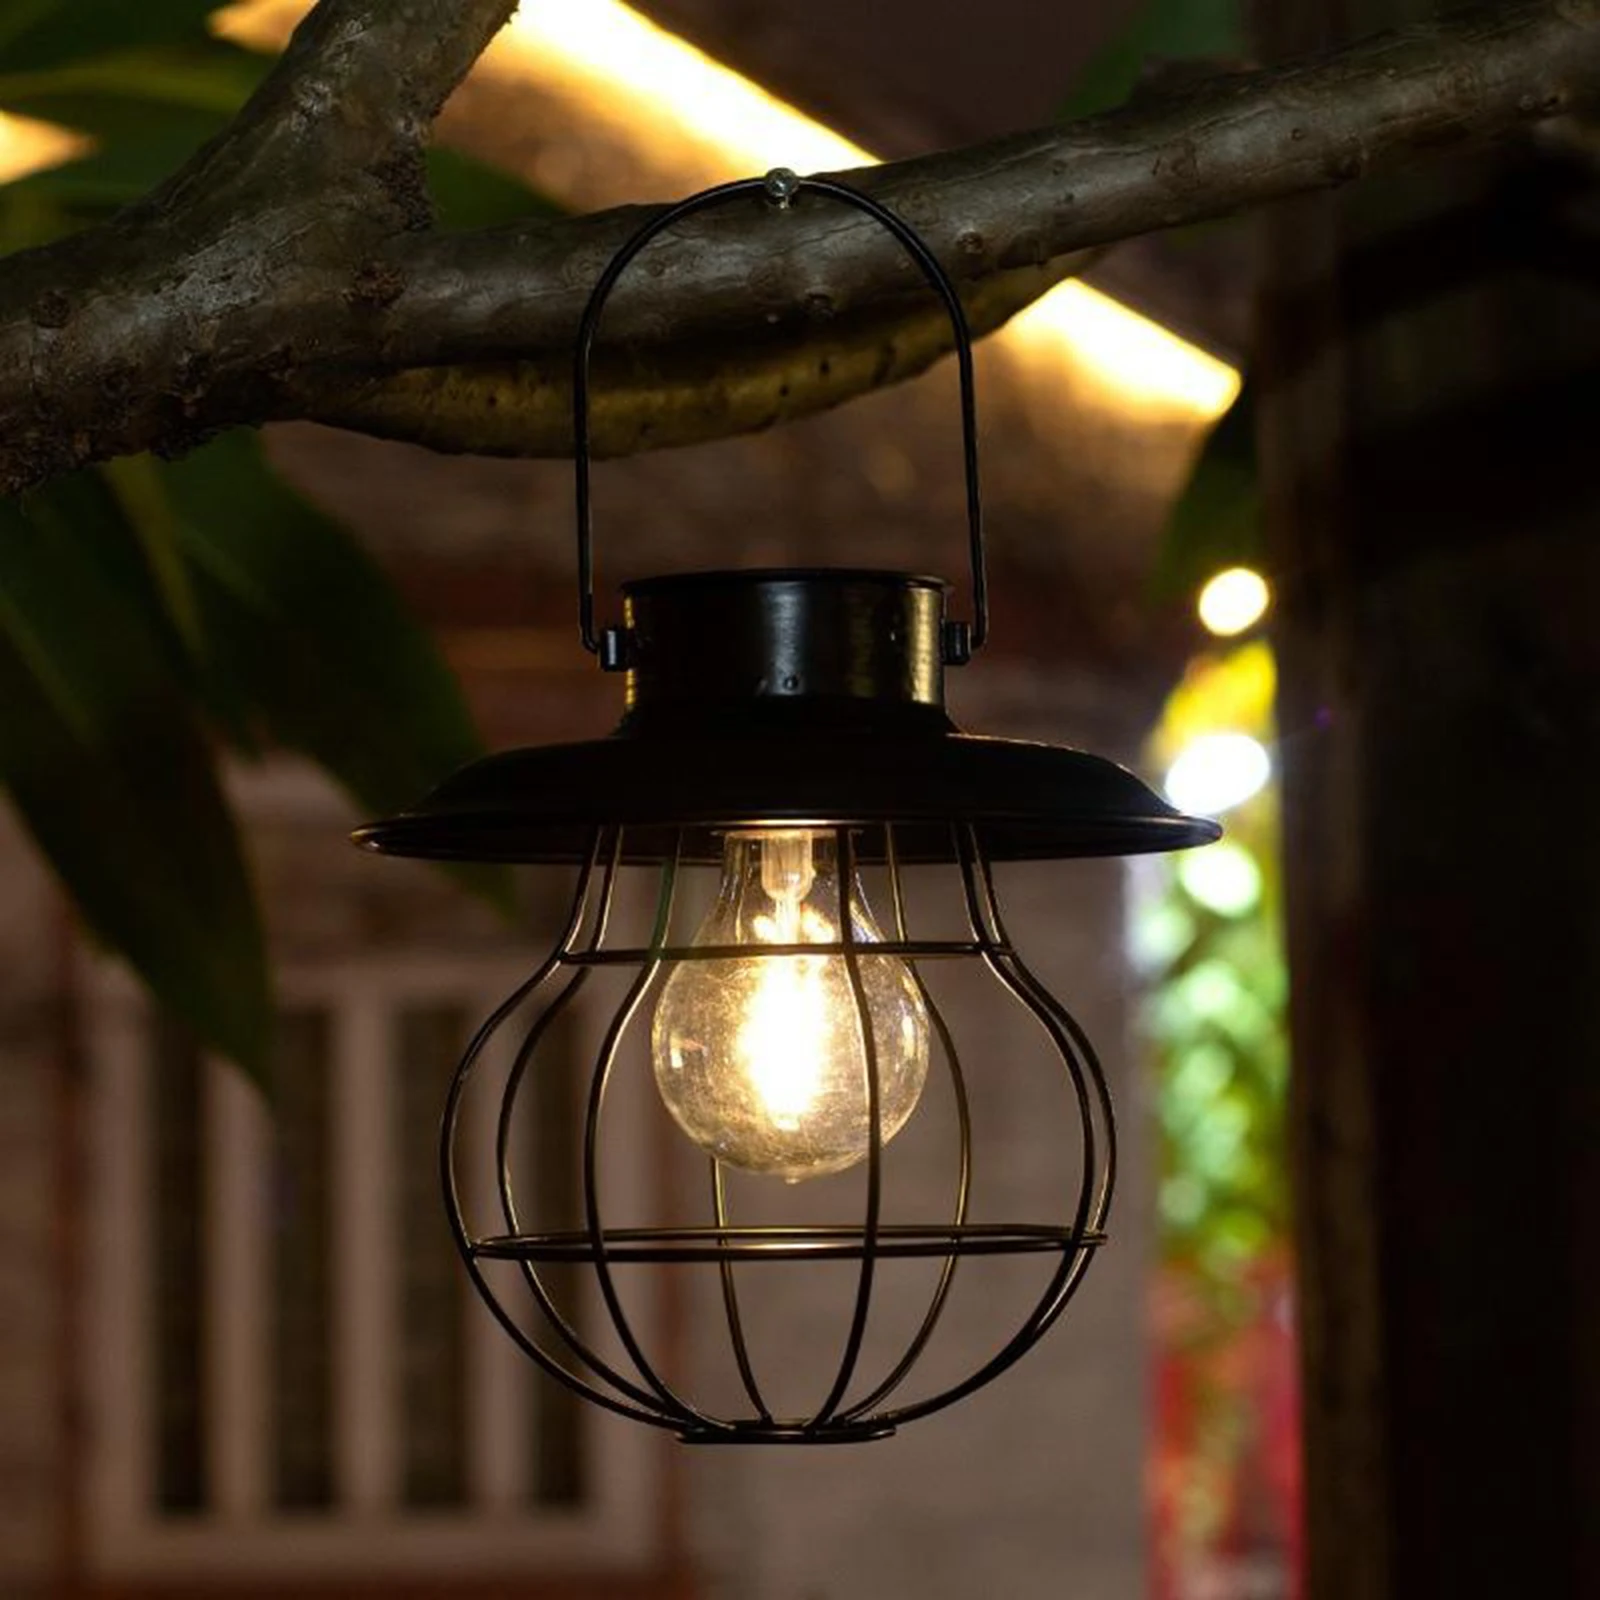 RUSTIC DISTRESSED FINISH HANGING SOLAR LED LIGHTED CAGED LANTERN LIGHT 3 COLORS 